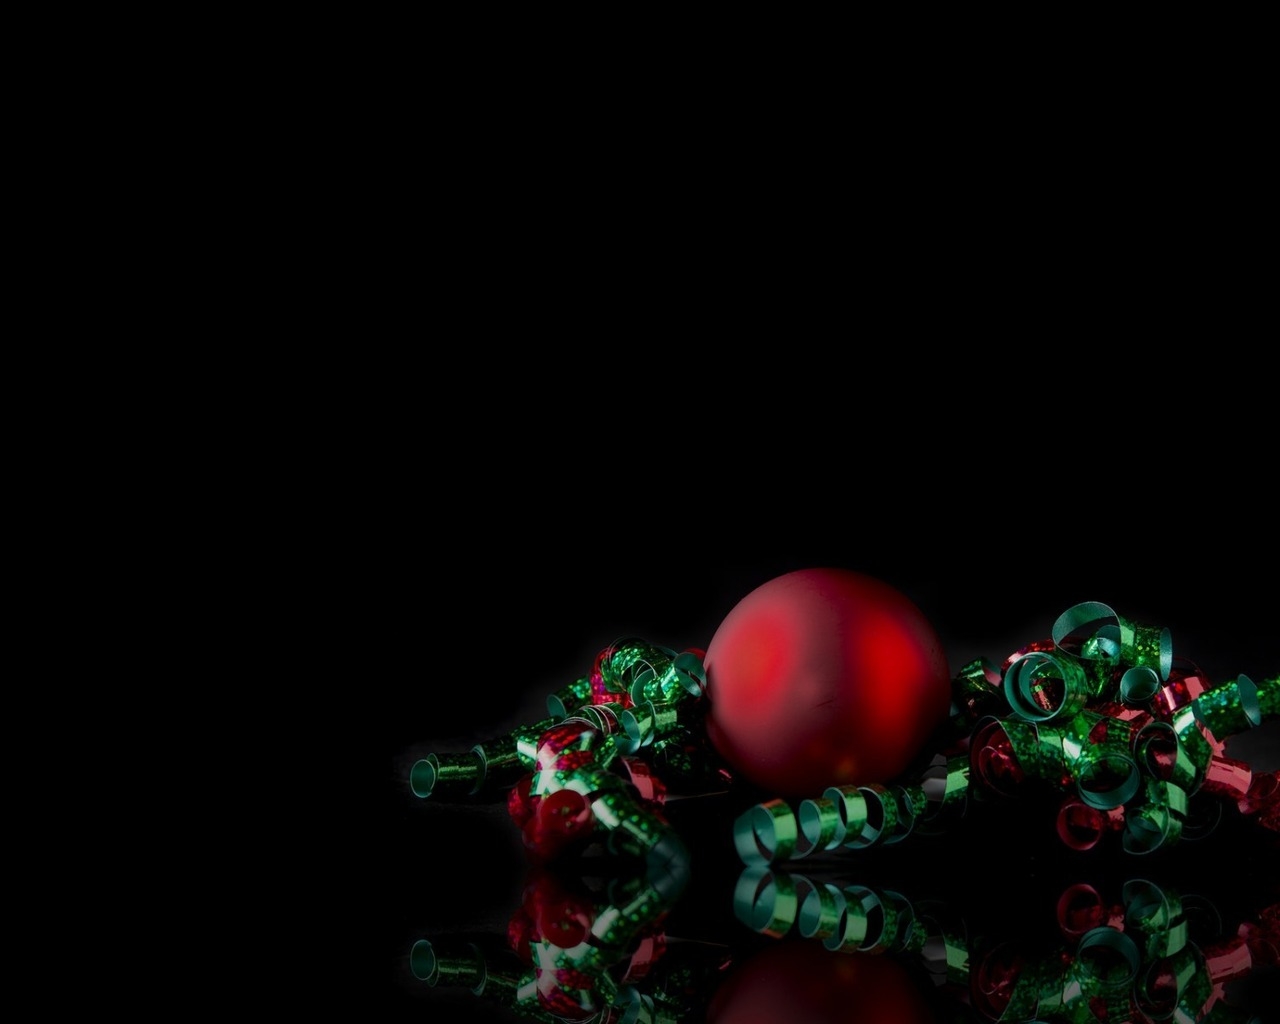 Simple Christmas Ornament for 1280 x 1024 resolution